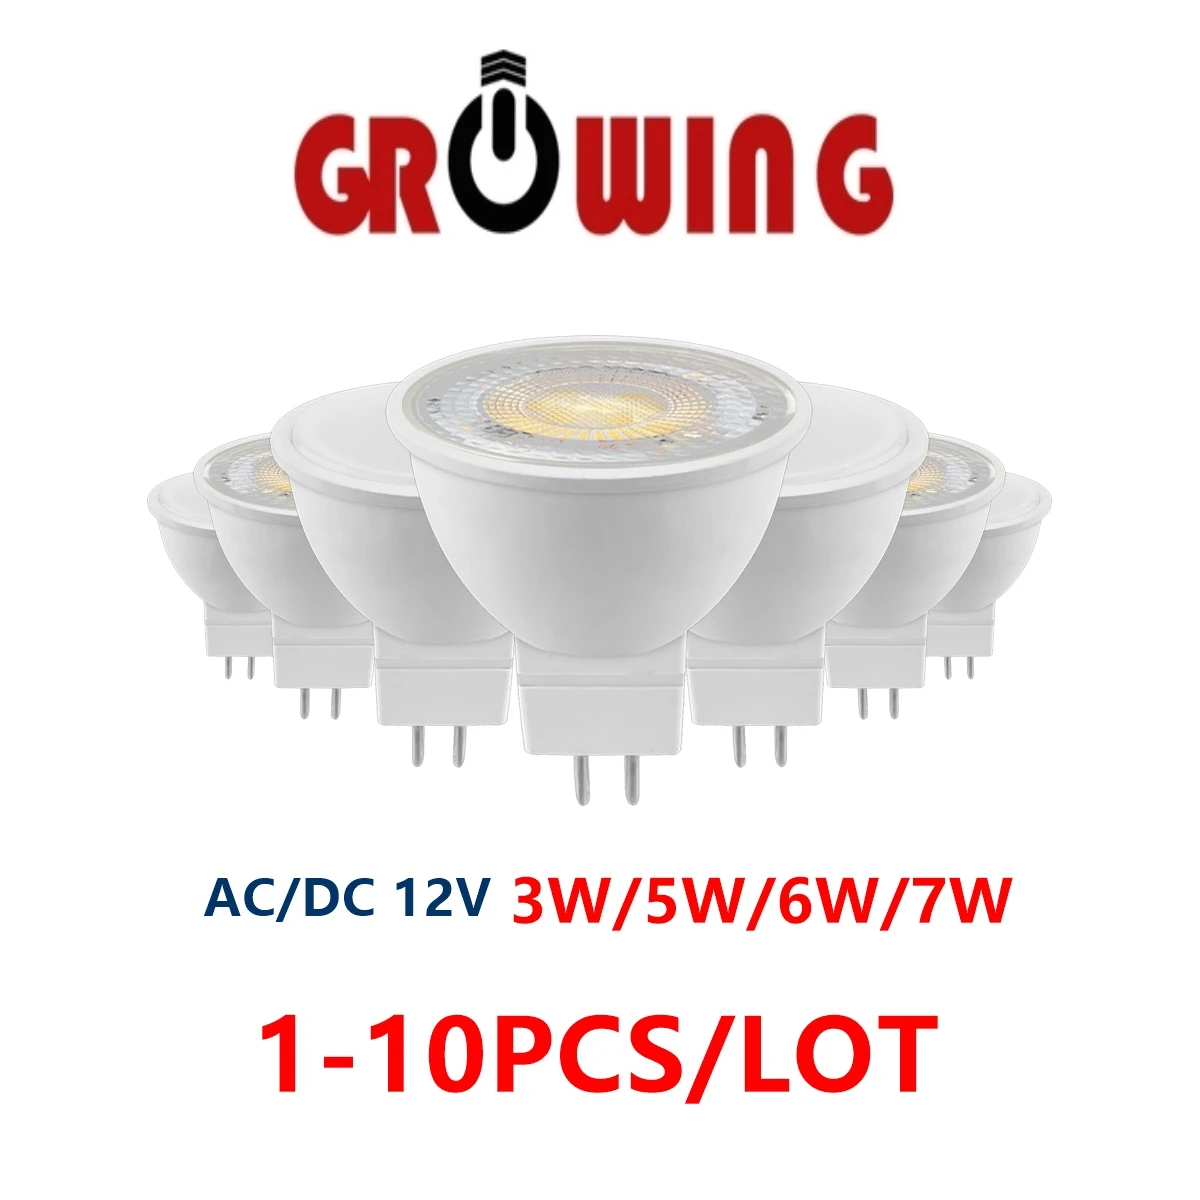 

LED low voltage AC/DC12V spotlight MR16 GU5.3 Luminous Angle 38/120 degrees 3W-7W 3000K-6000K can replace 20W 50W halogen lamp